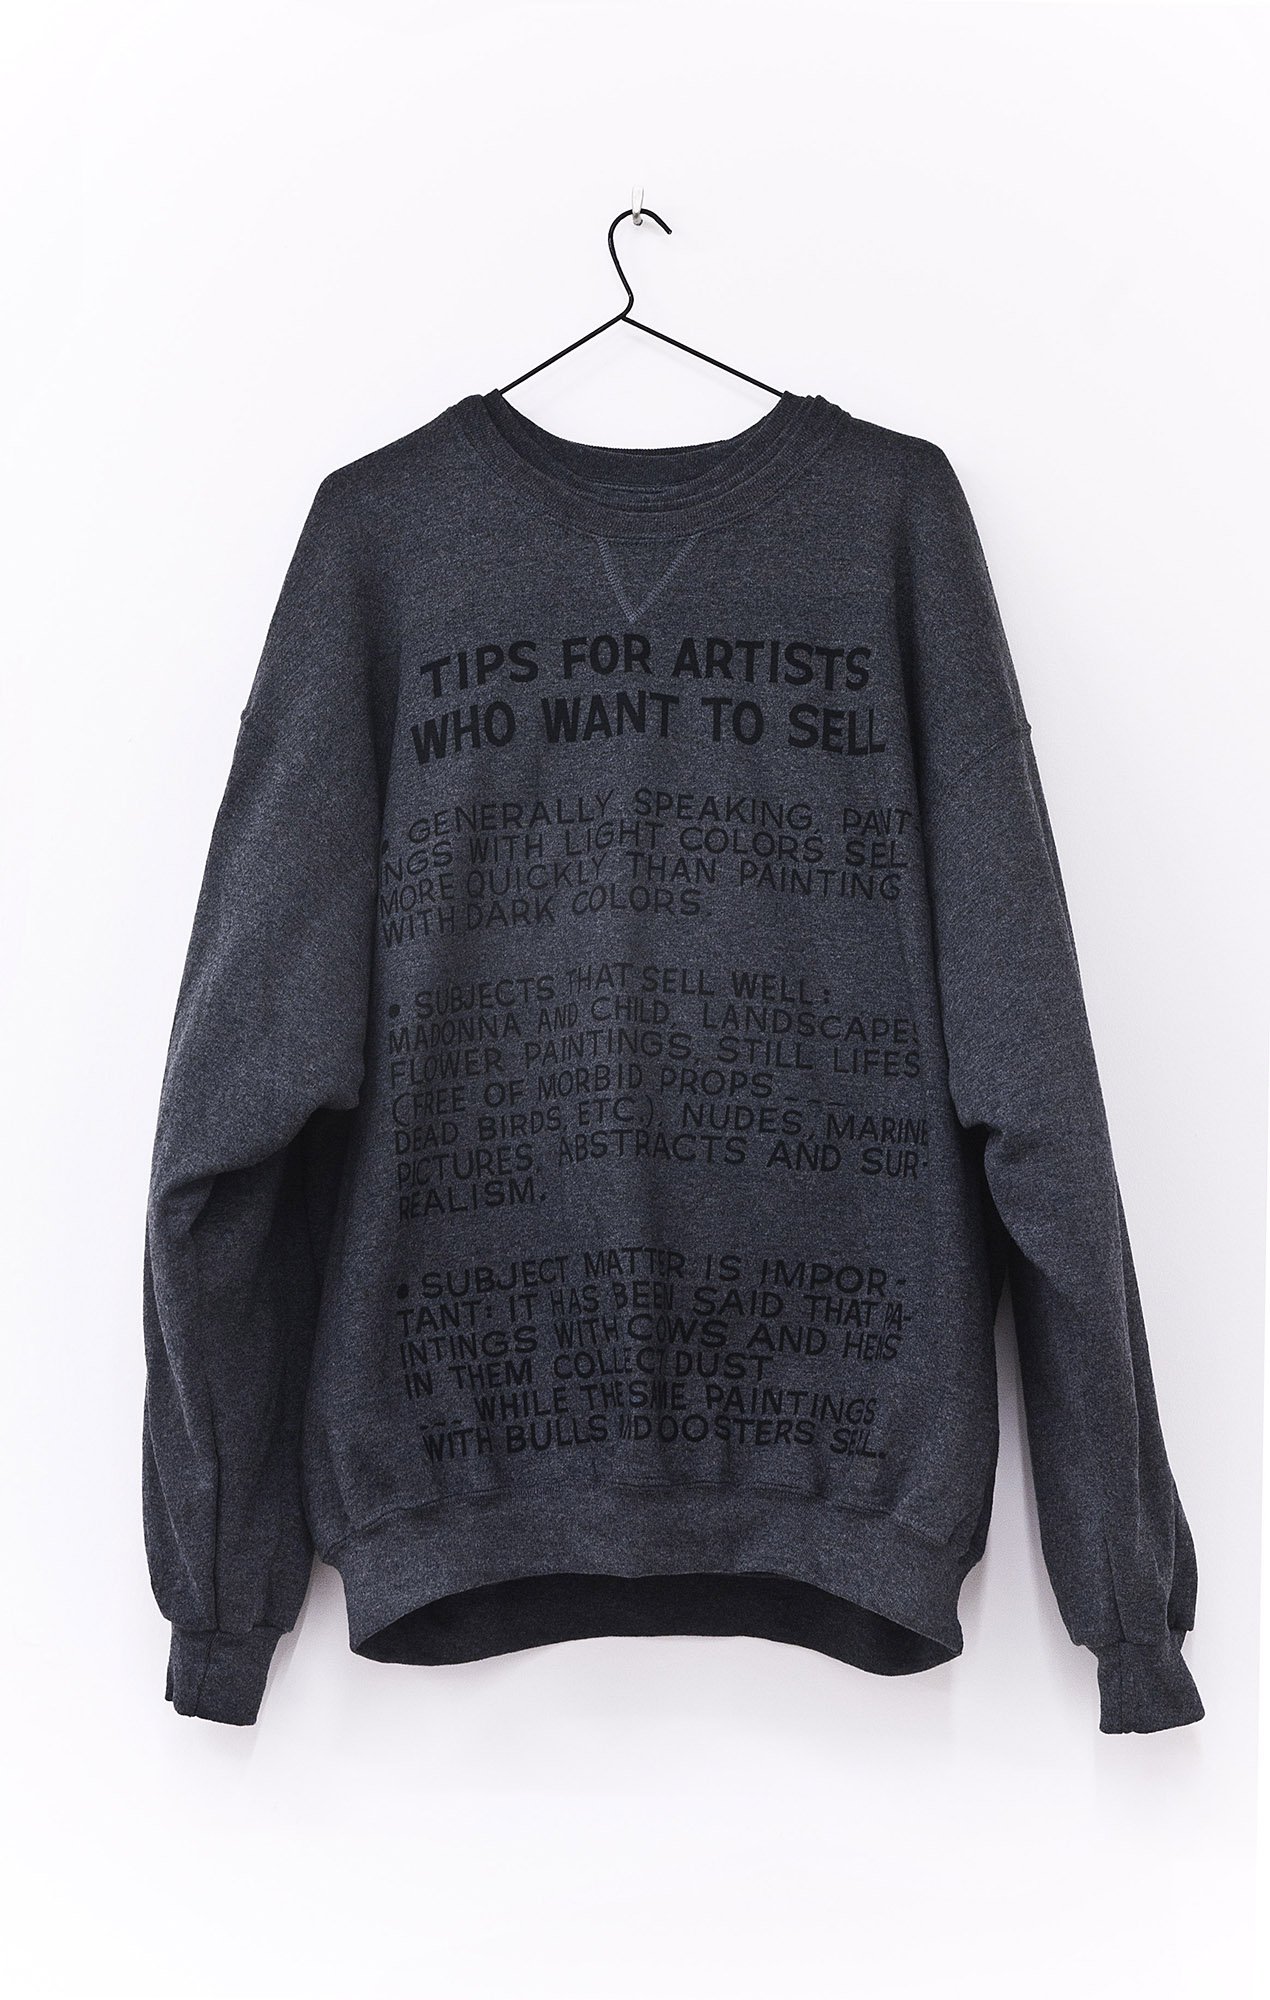 Banu Cennetoğlu, Baldessari for All, 4 sweatshirts printed in Istanbul with a text by John Baldessari. The sweatshirt imitates the original reproduction that was done for Baldessari’s retrospective at MOCA. In M, L, XL, XXL, 2010. Installation view, SAMPLE SALE / 2010 BC, Rodeo, Istanbul, 2010